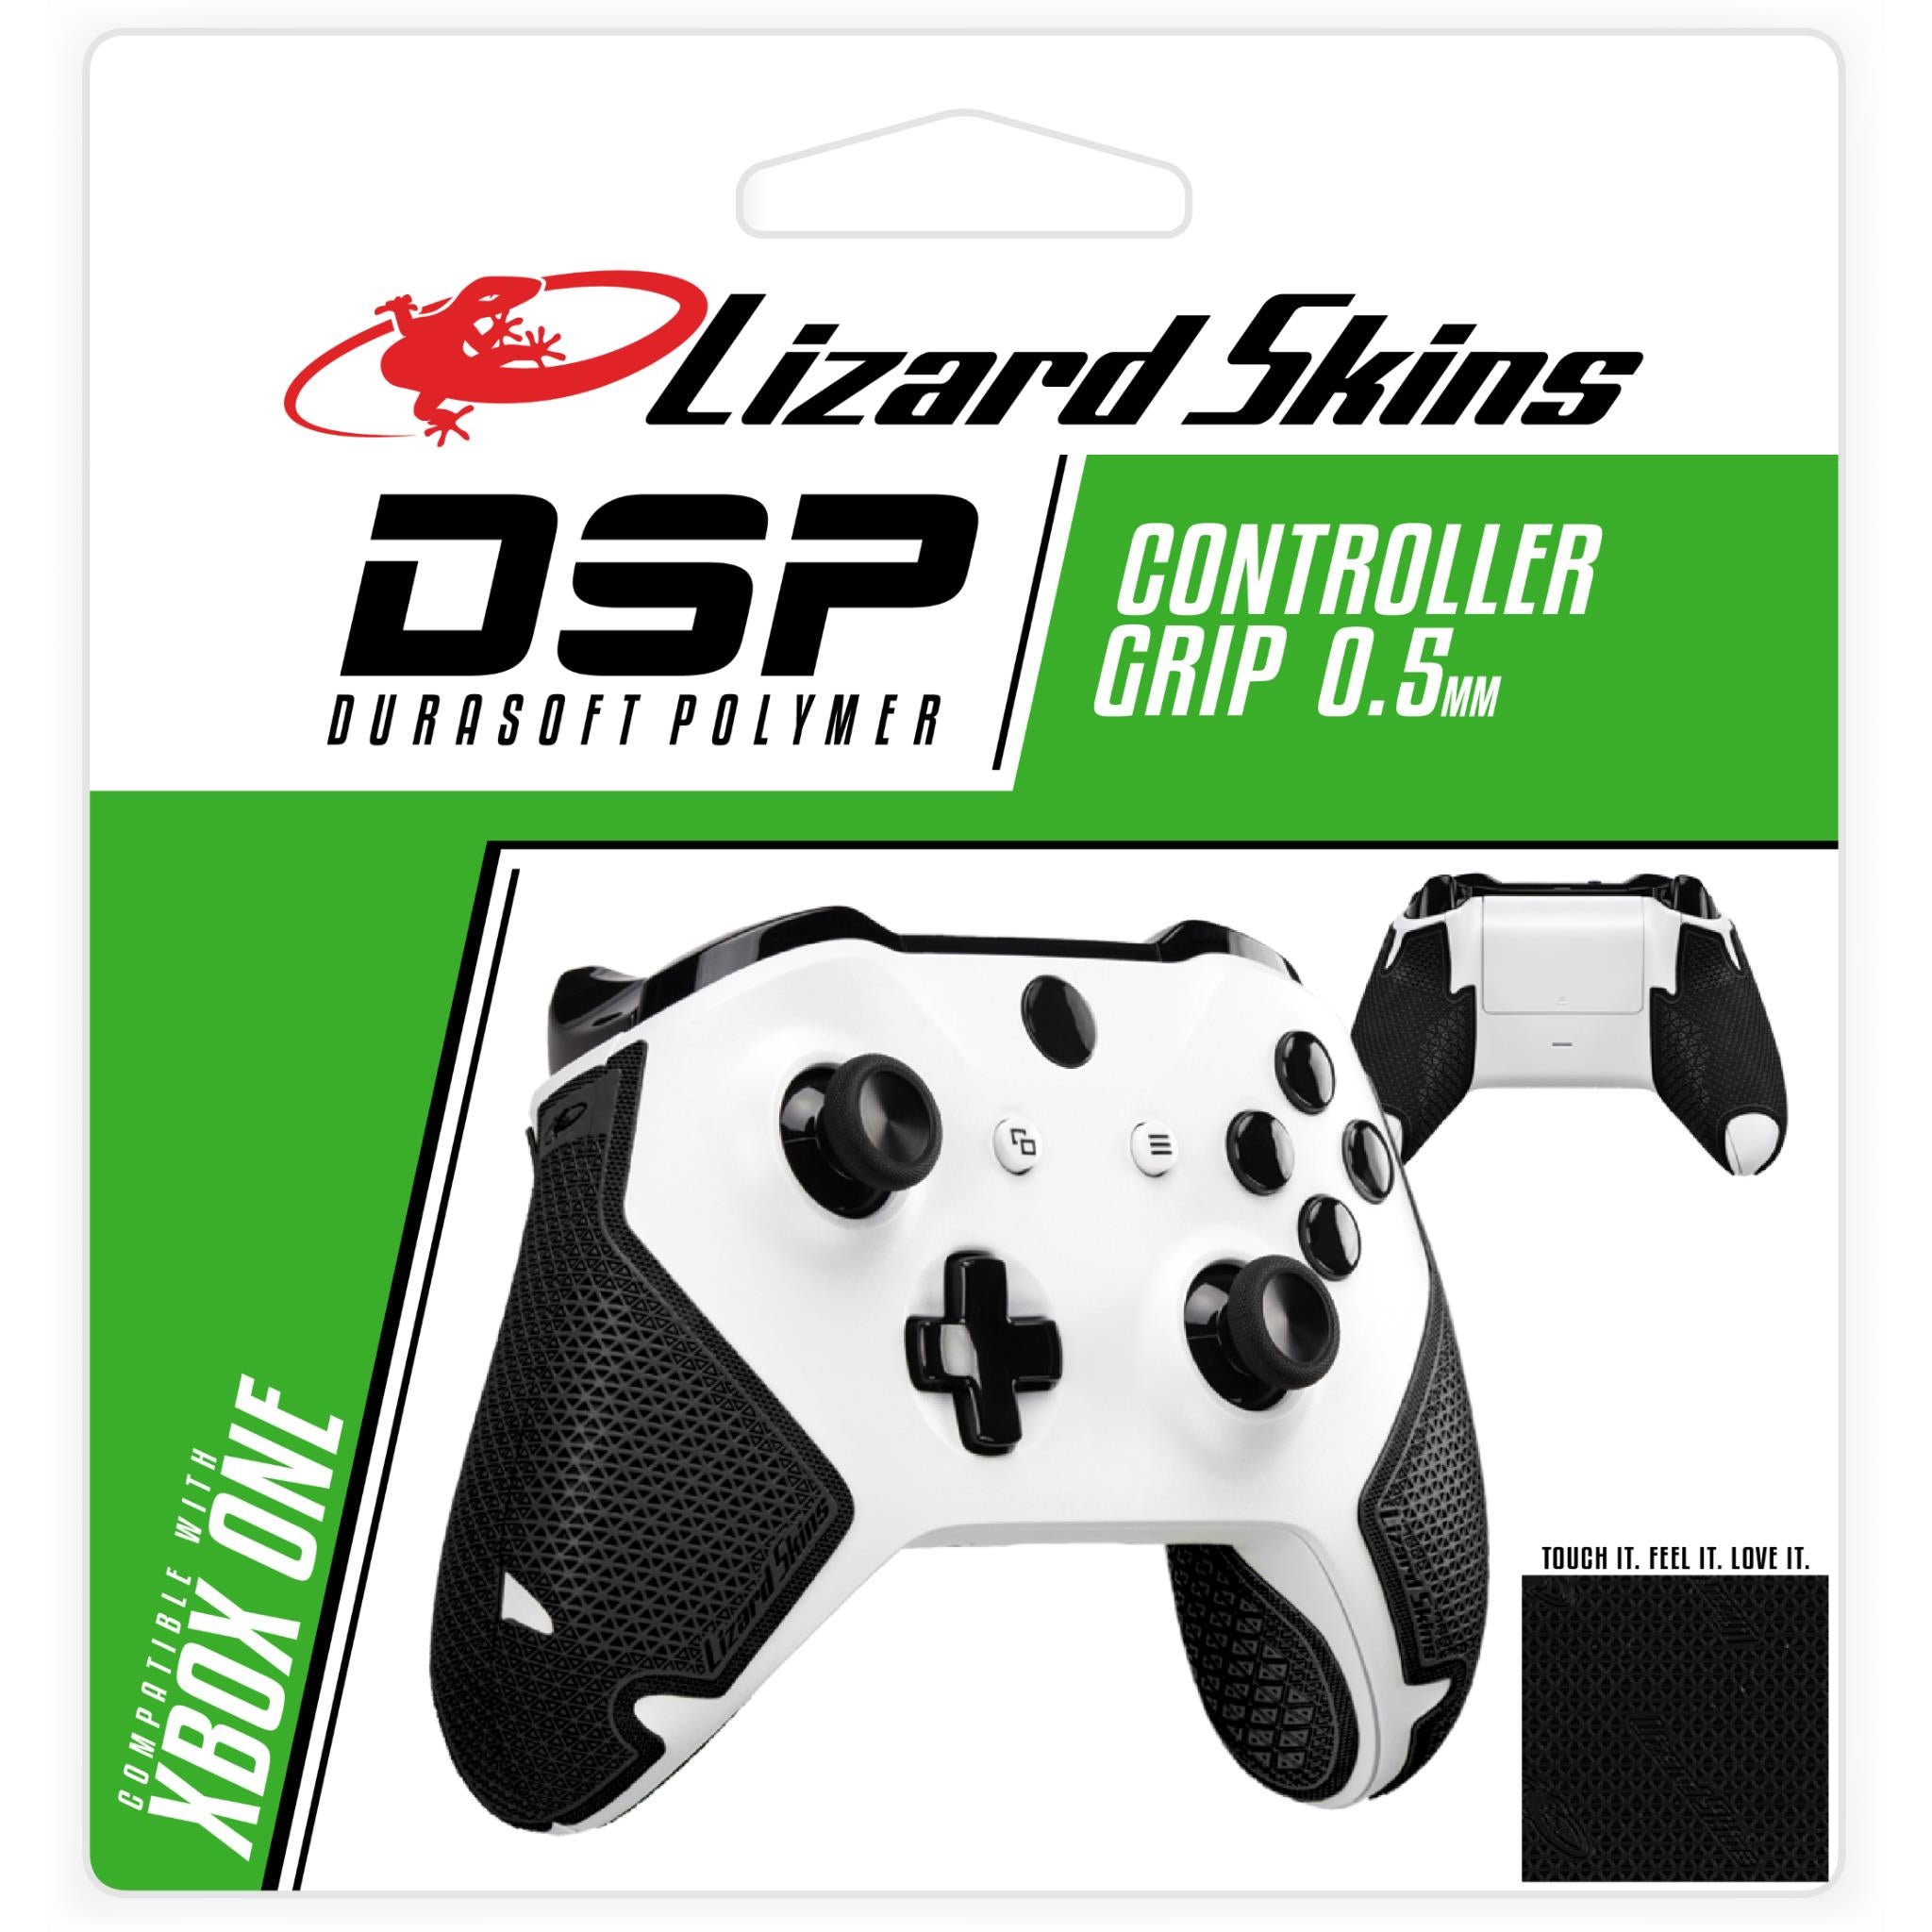 lizard skins dsp controller grip for xbox one (jet black)